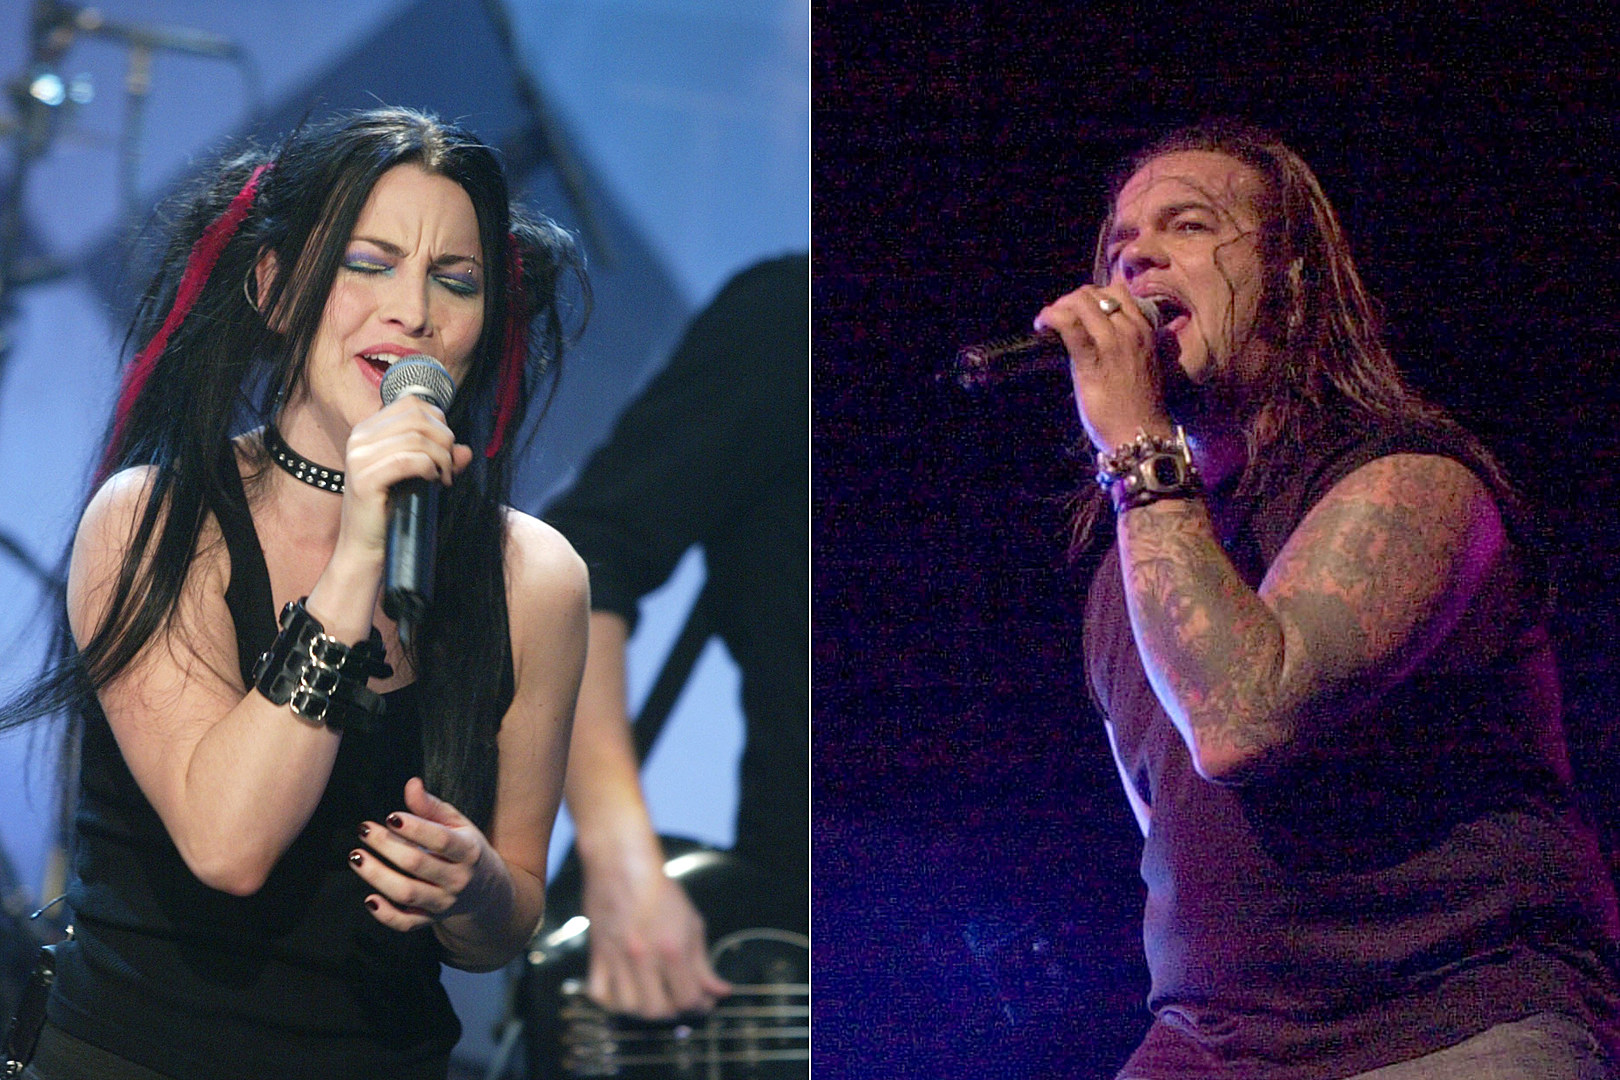 Evanescence's 'Bring Me to Life' Almost Had Another Guest Singer